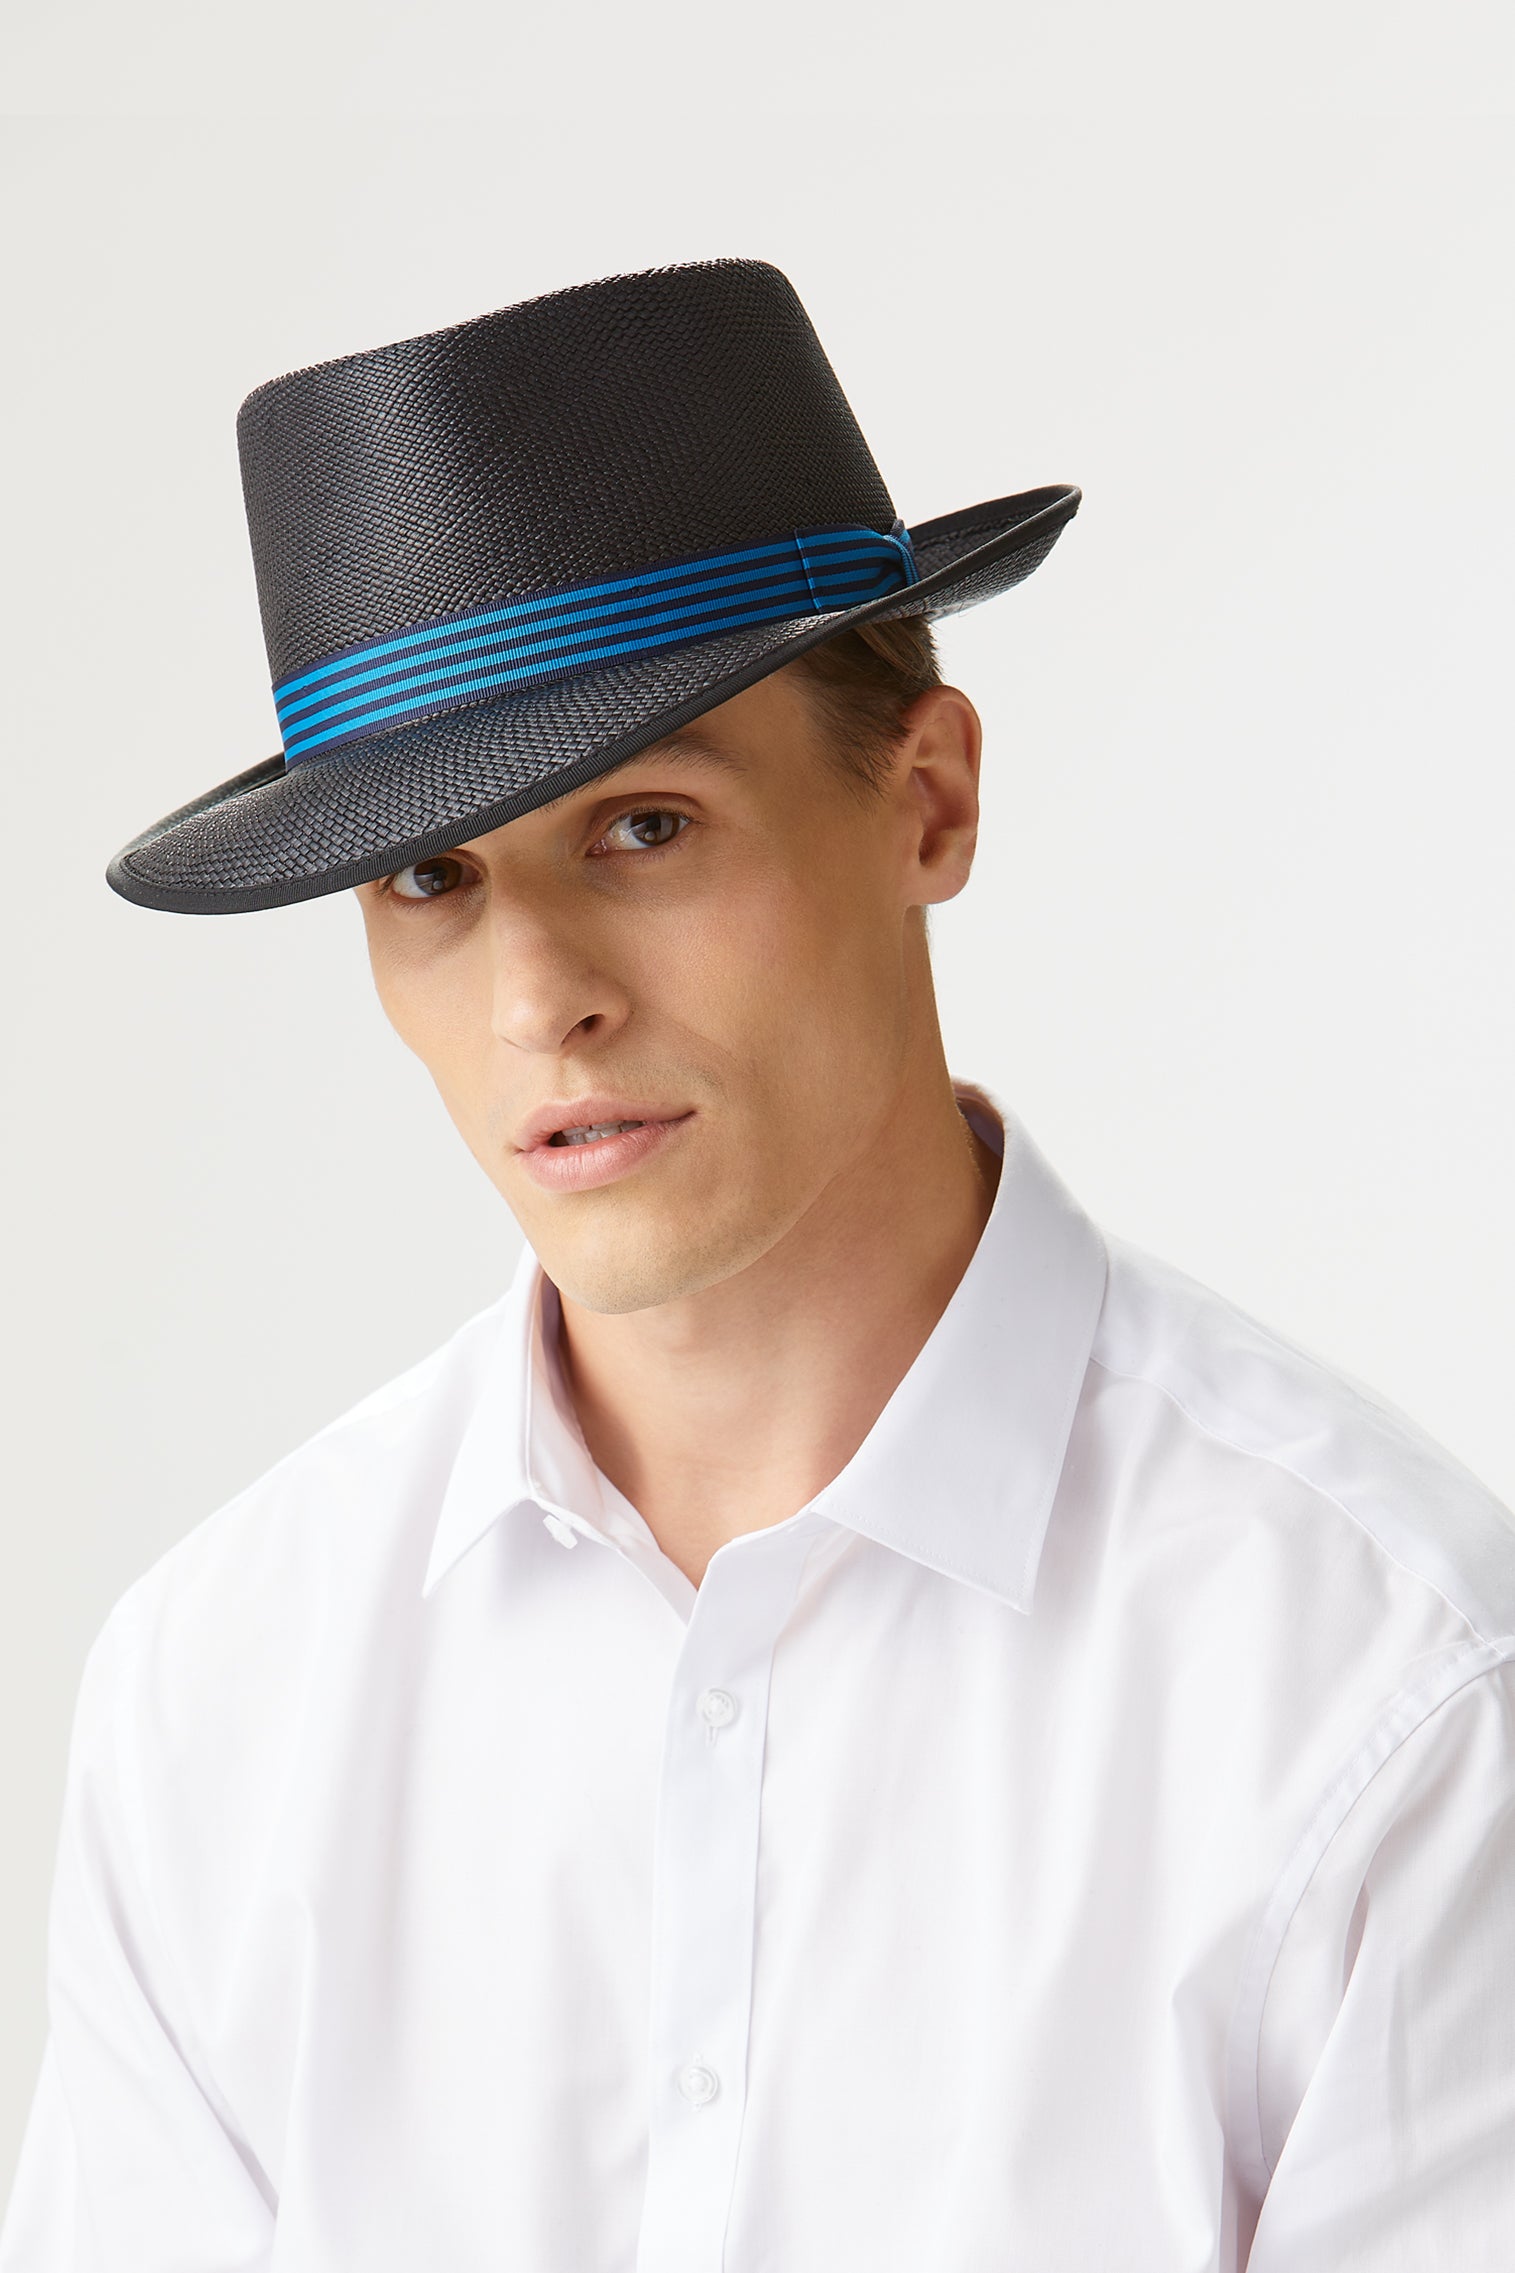 BLACK NARROW-BRIMMED PANAMA HAT WITH A BLUE STRIPED RIBBON BAND AND BOW FROM THE LOCK & CO. HATTERS X 007 BOND COLLECTION